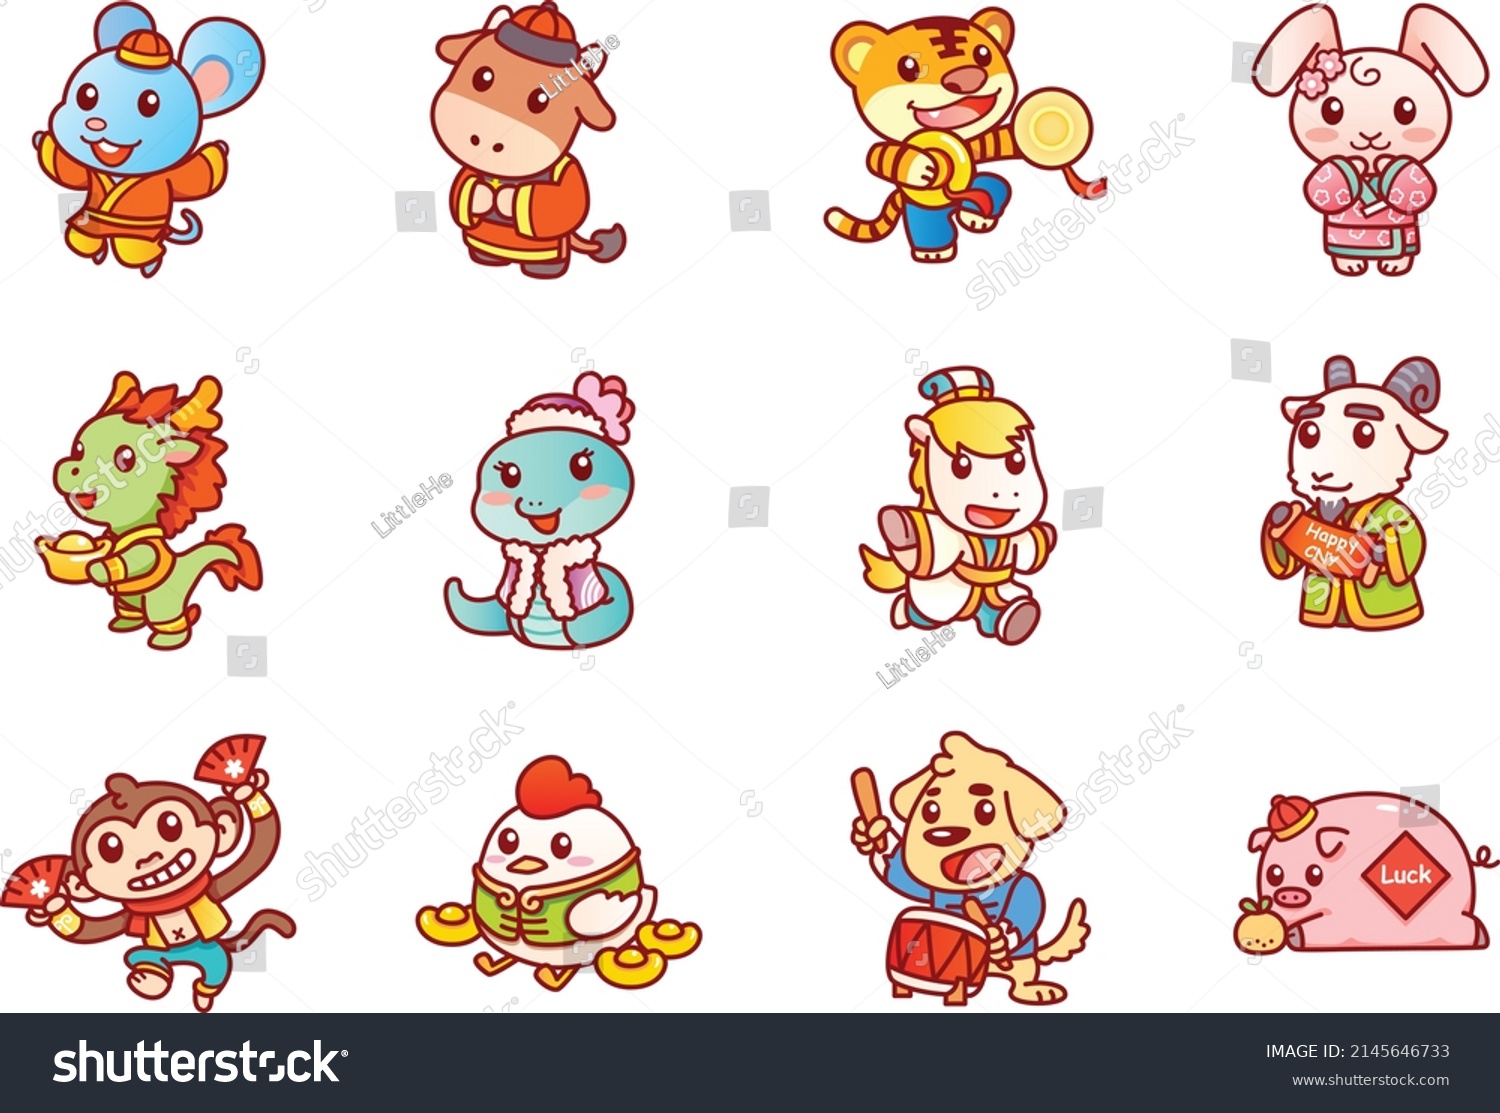 SVG of Cute Chinese New Year Zodiac in Vector illustration.  12 CNY Animals Rat, Ox, Tiger, Rabbit, Dragon, Snake, Horse, Goat, Monkey, Rooster, Dog and Pig for celebrate Lunar Festival. svg